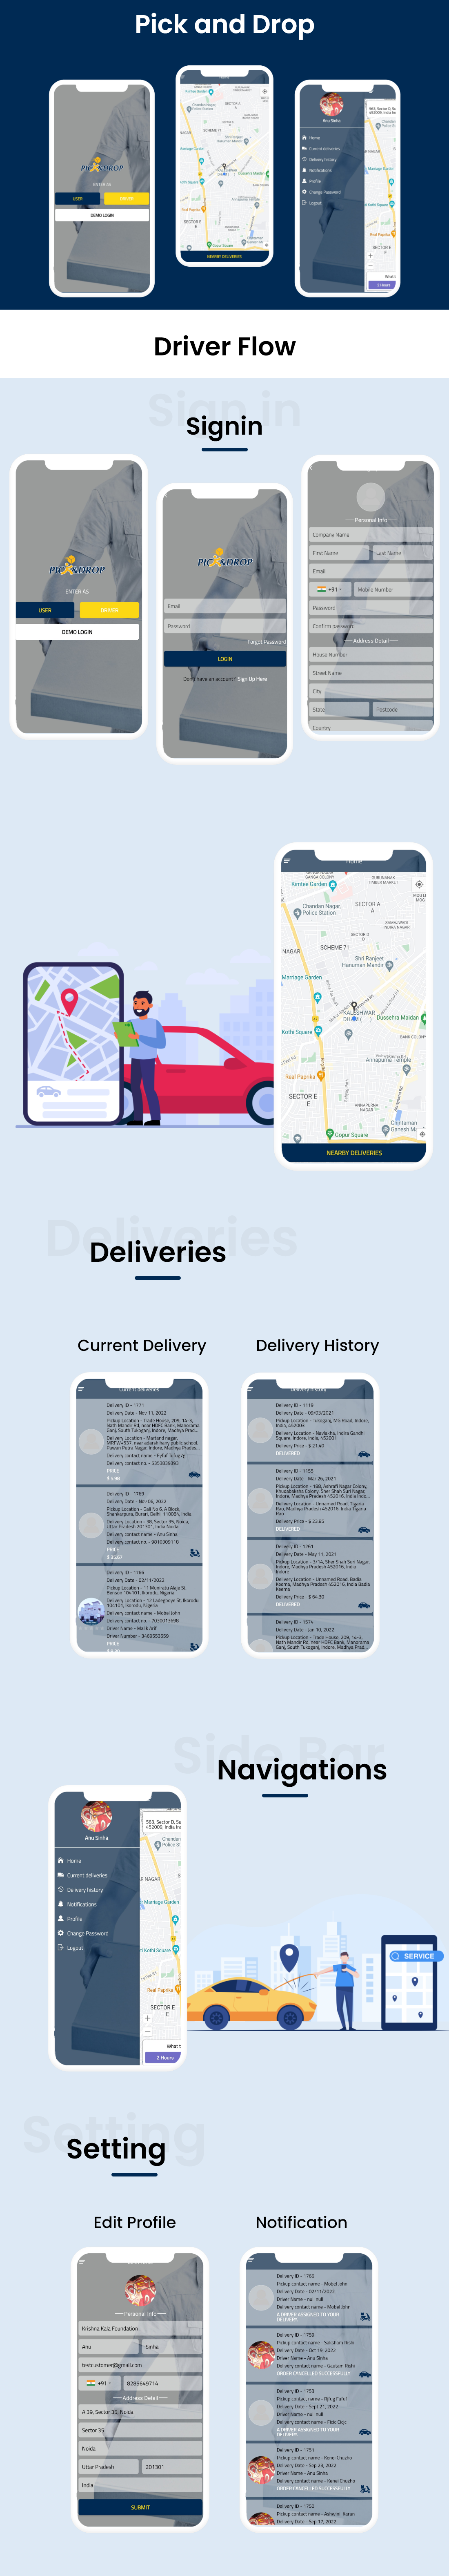  Food delivery | Delivery App | Shipping | Tracking | Courier | Parcel | Logistic | Package |System | Best mobile App | Food delivery app | delivery | Food ordering | delivery food  